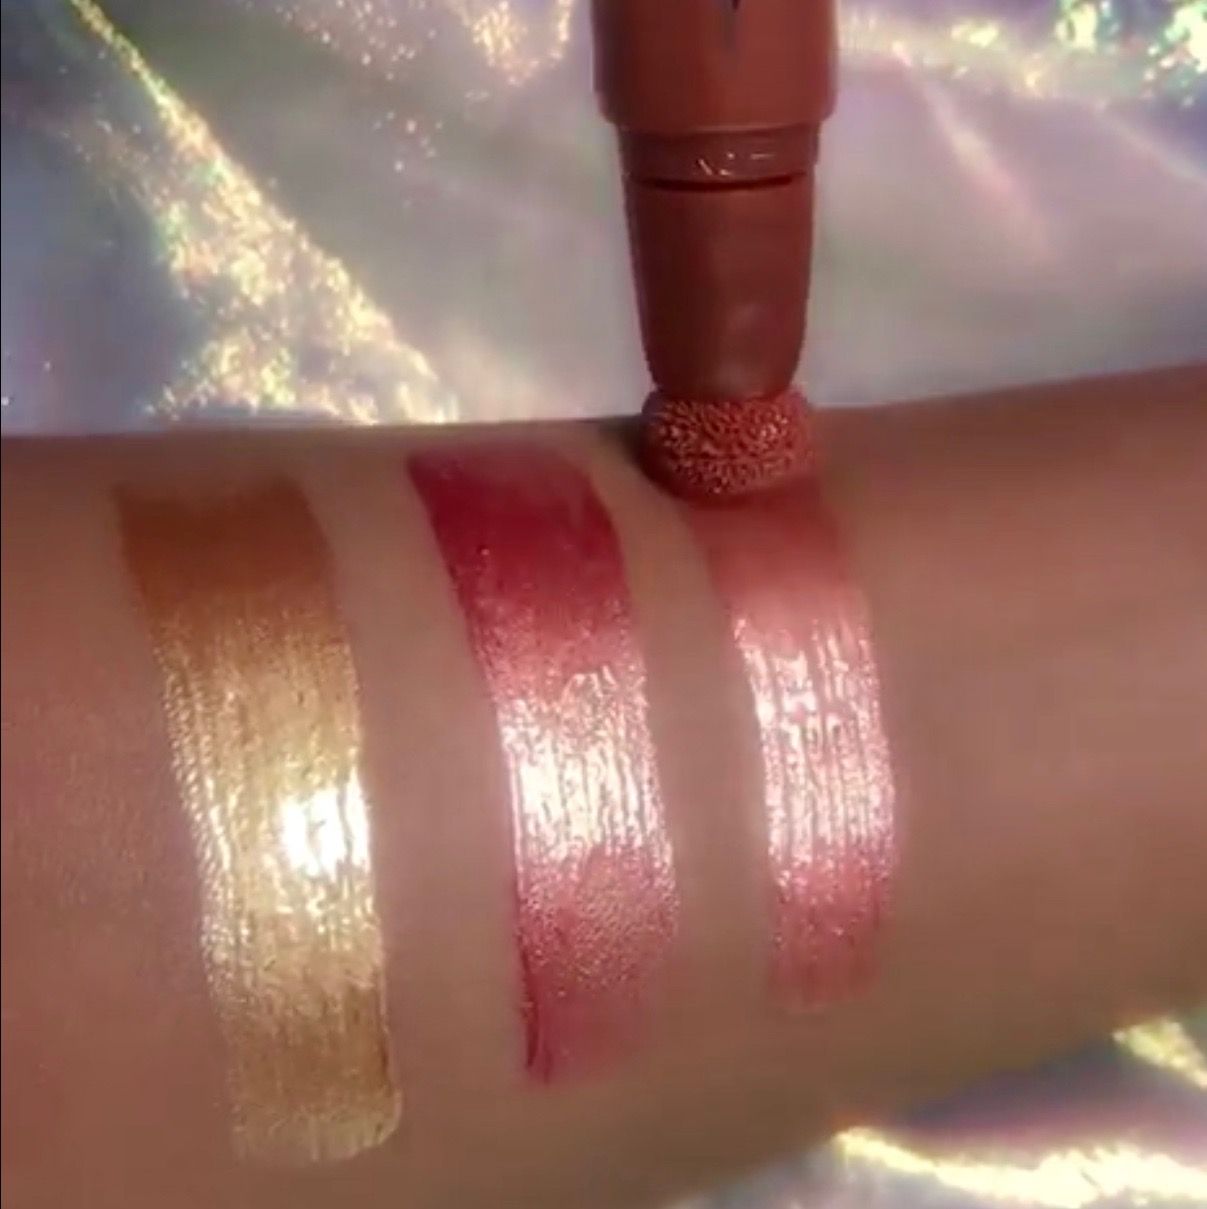 Beauty Highlighter Wand- choose your shade